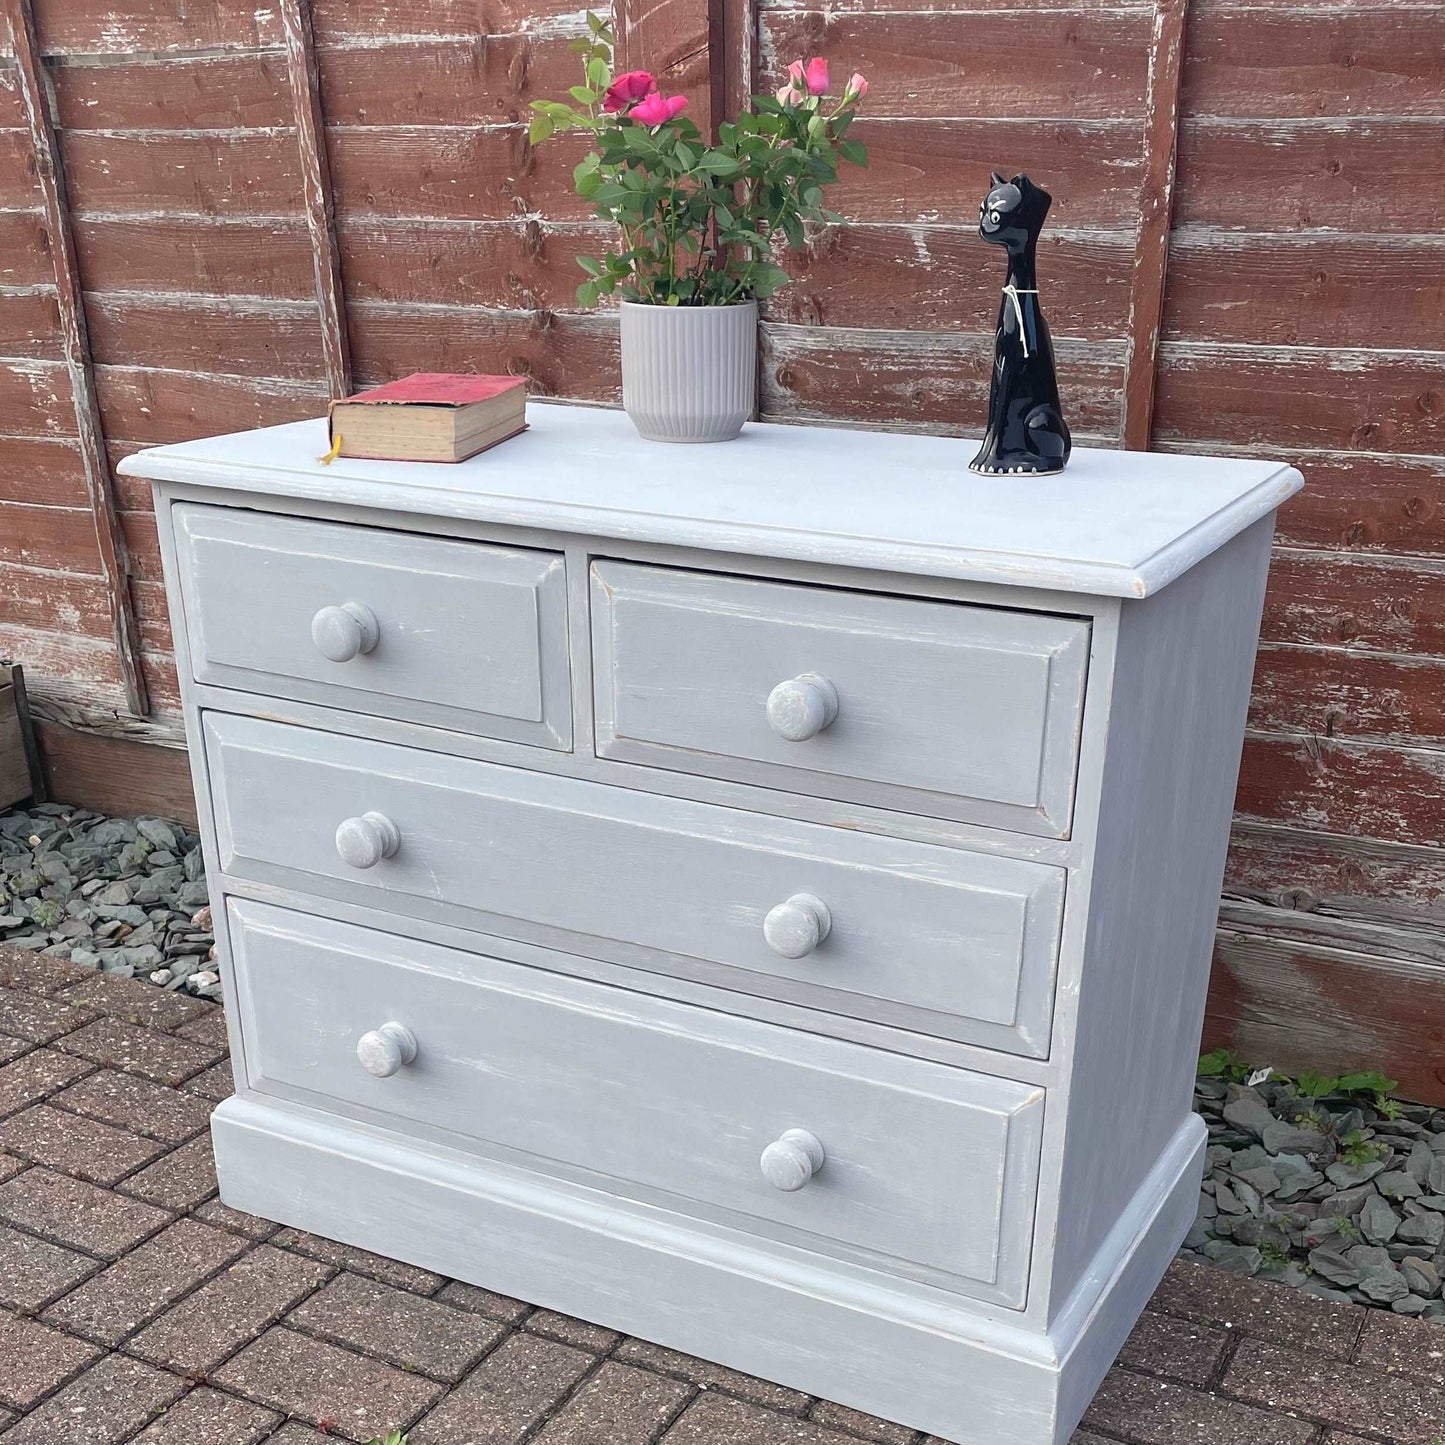 Solid pine 2 over 3 chest of drawers grey distressed paint.